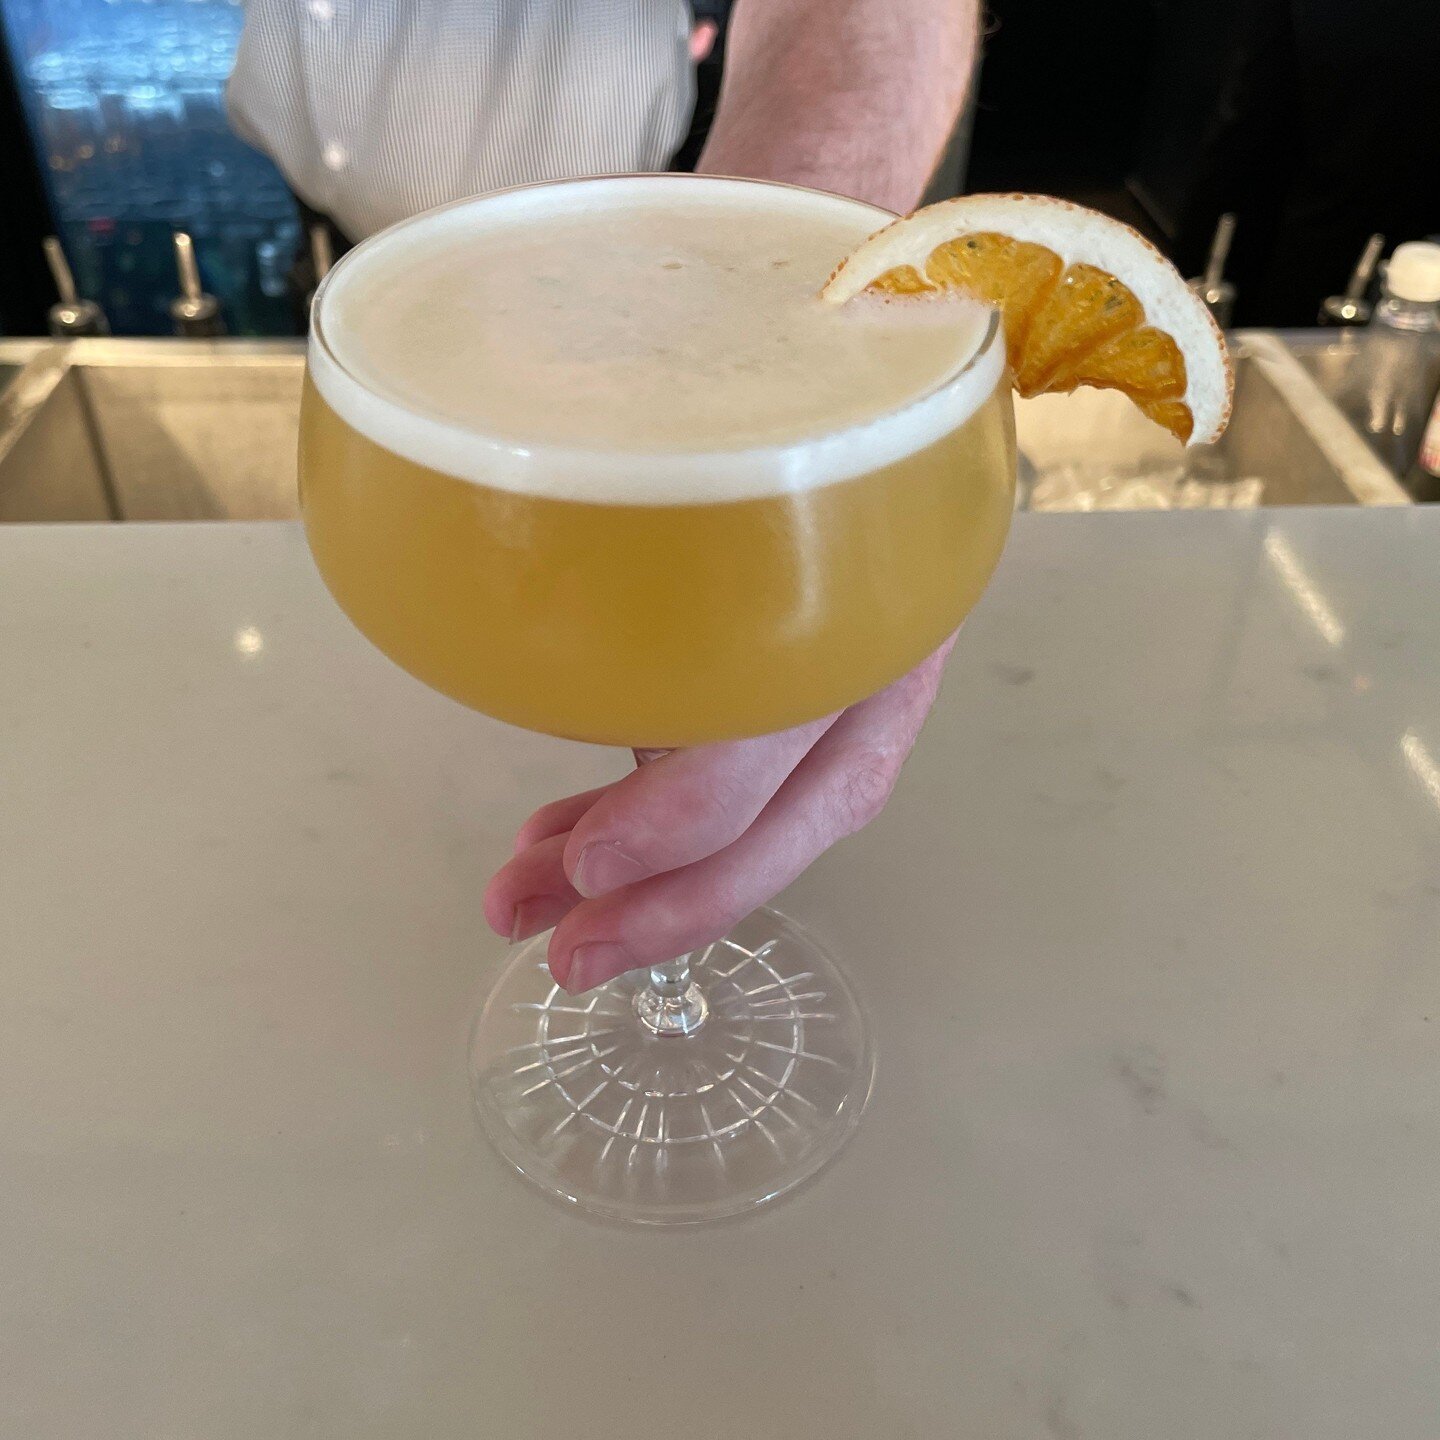 Escape to a tropical paradise with our Passionfruit Martini mocktail! A non-alcoholic drink with pineapple juice, lemon juice and passionfruit puree. 🍍🍋🍹⁠
⁠
#corerestaurantandbar